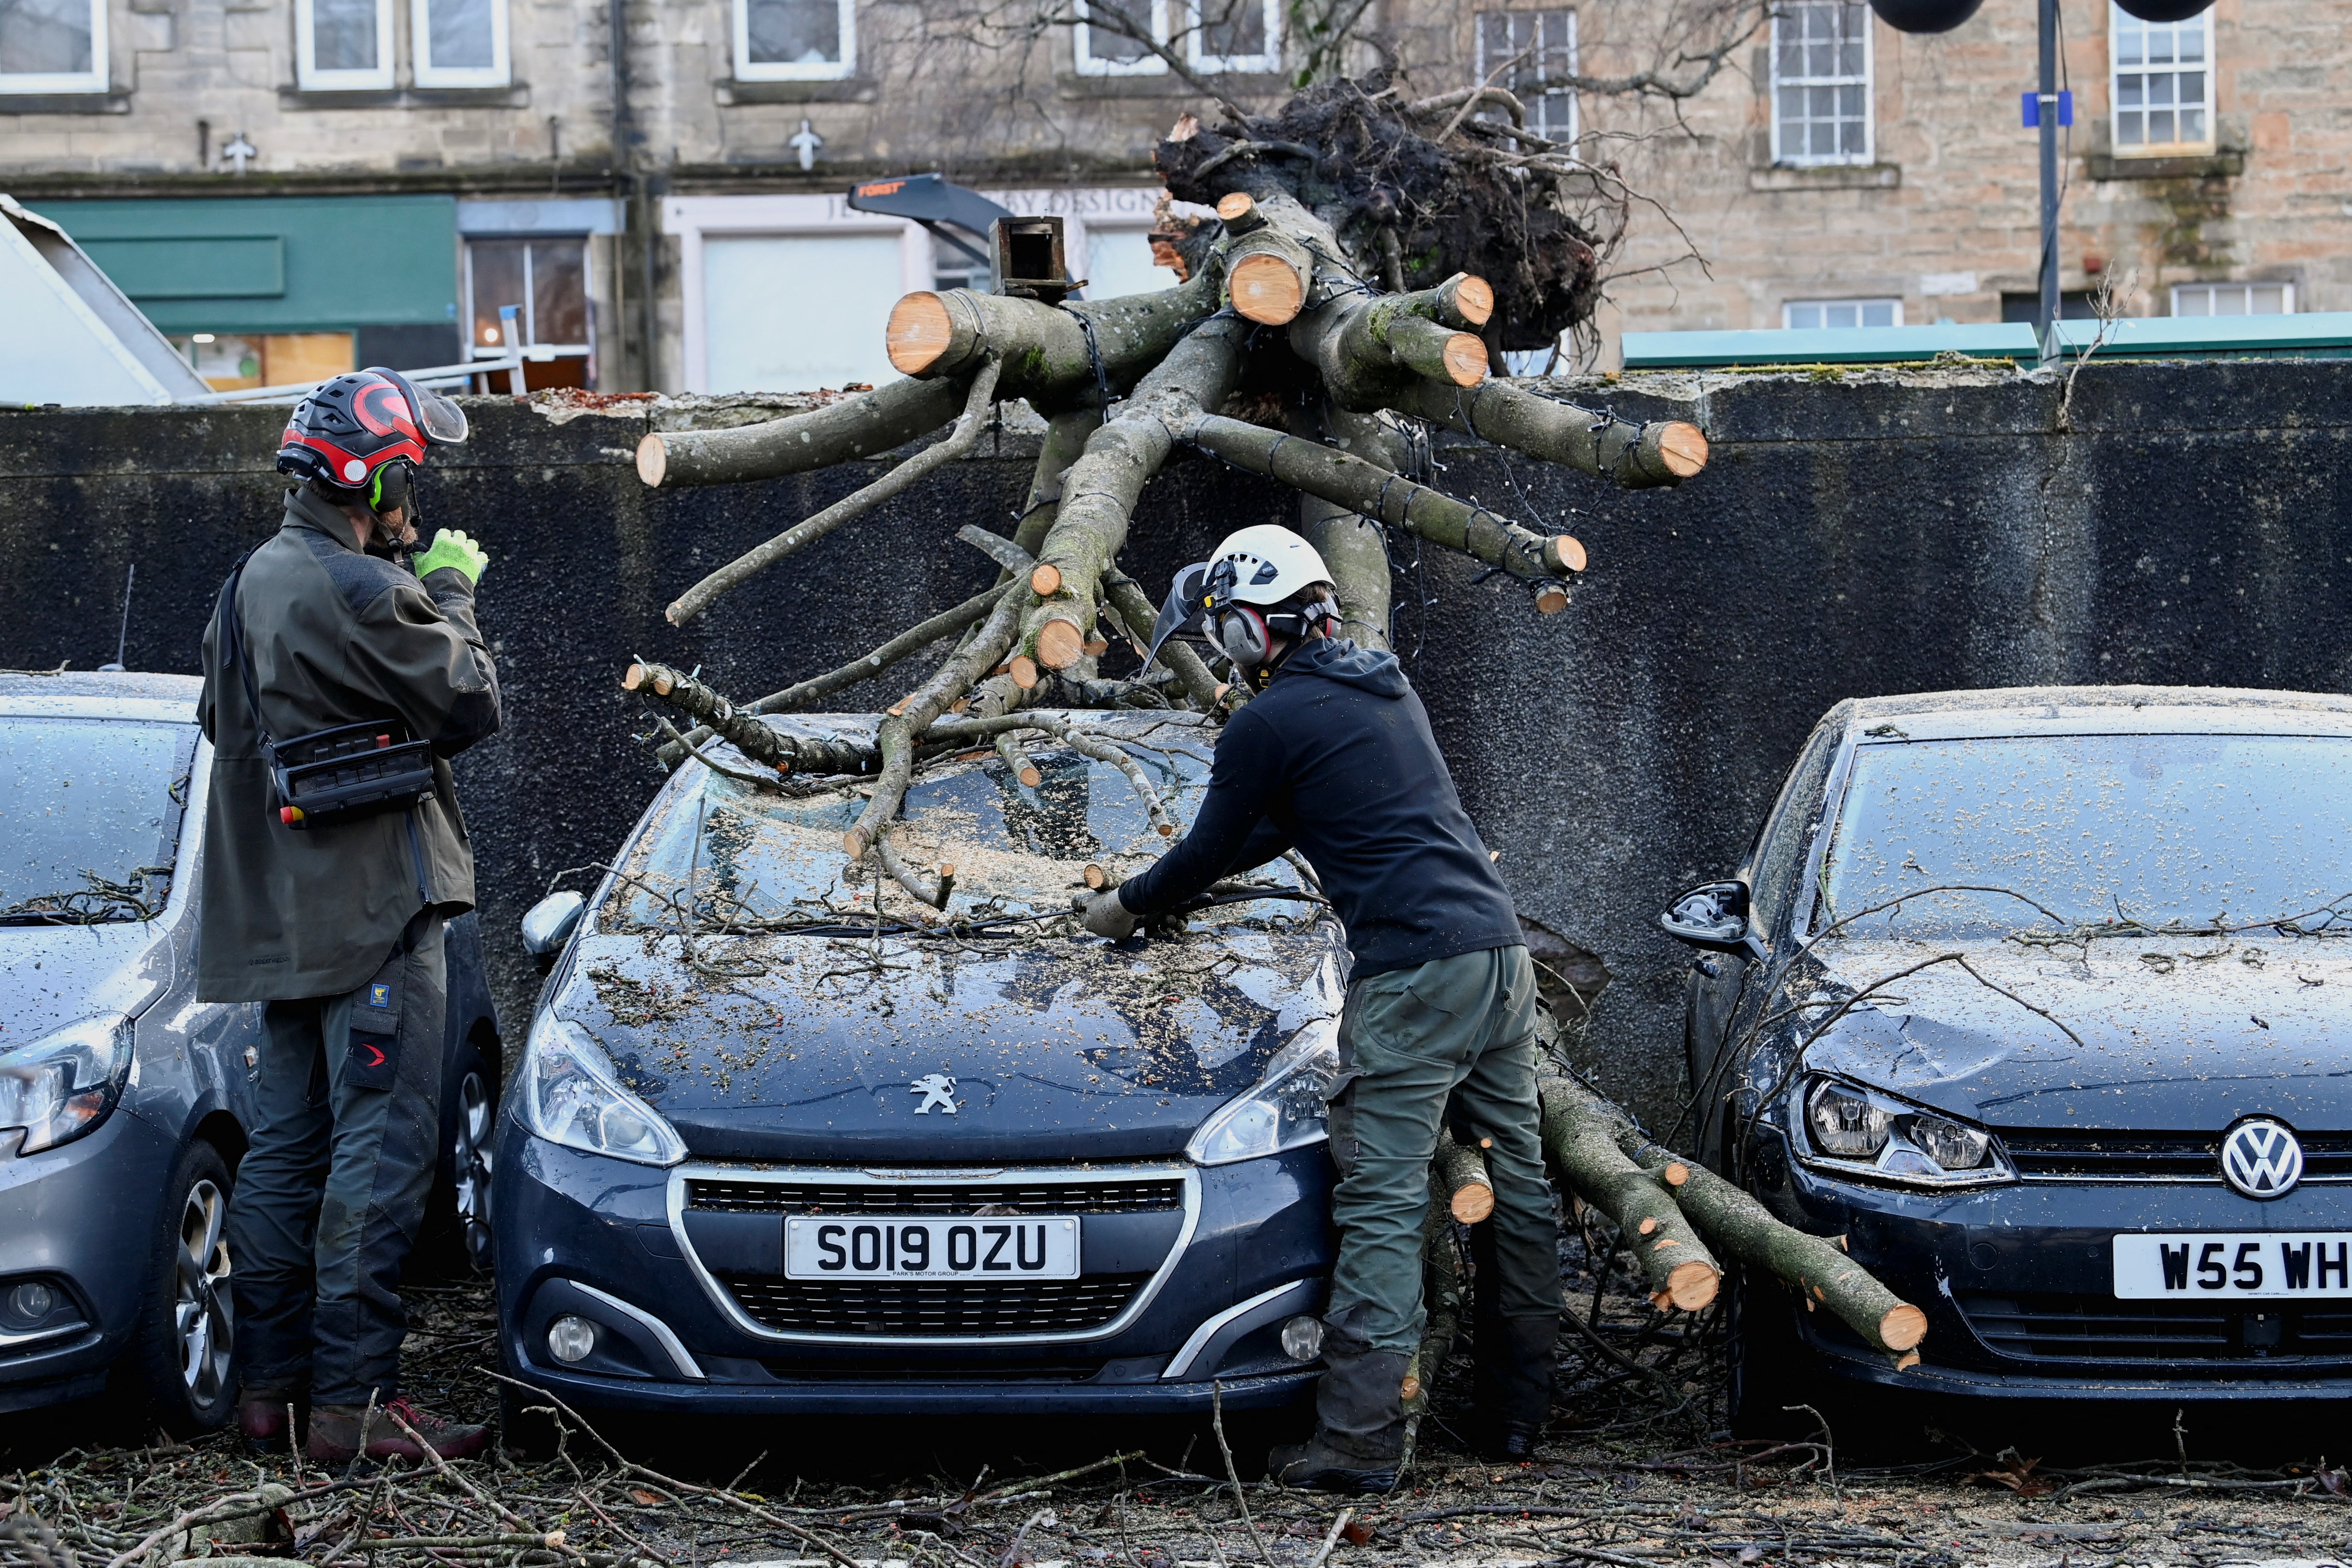 Tree surgeons remove a fallen tree from a car during Storm Isha in Linlithgow, West Lothian, Scotland